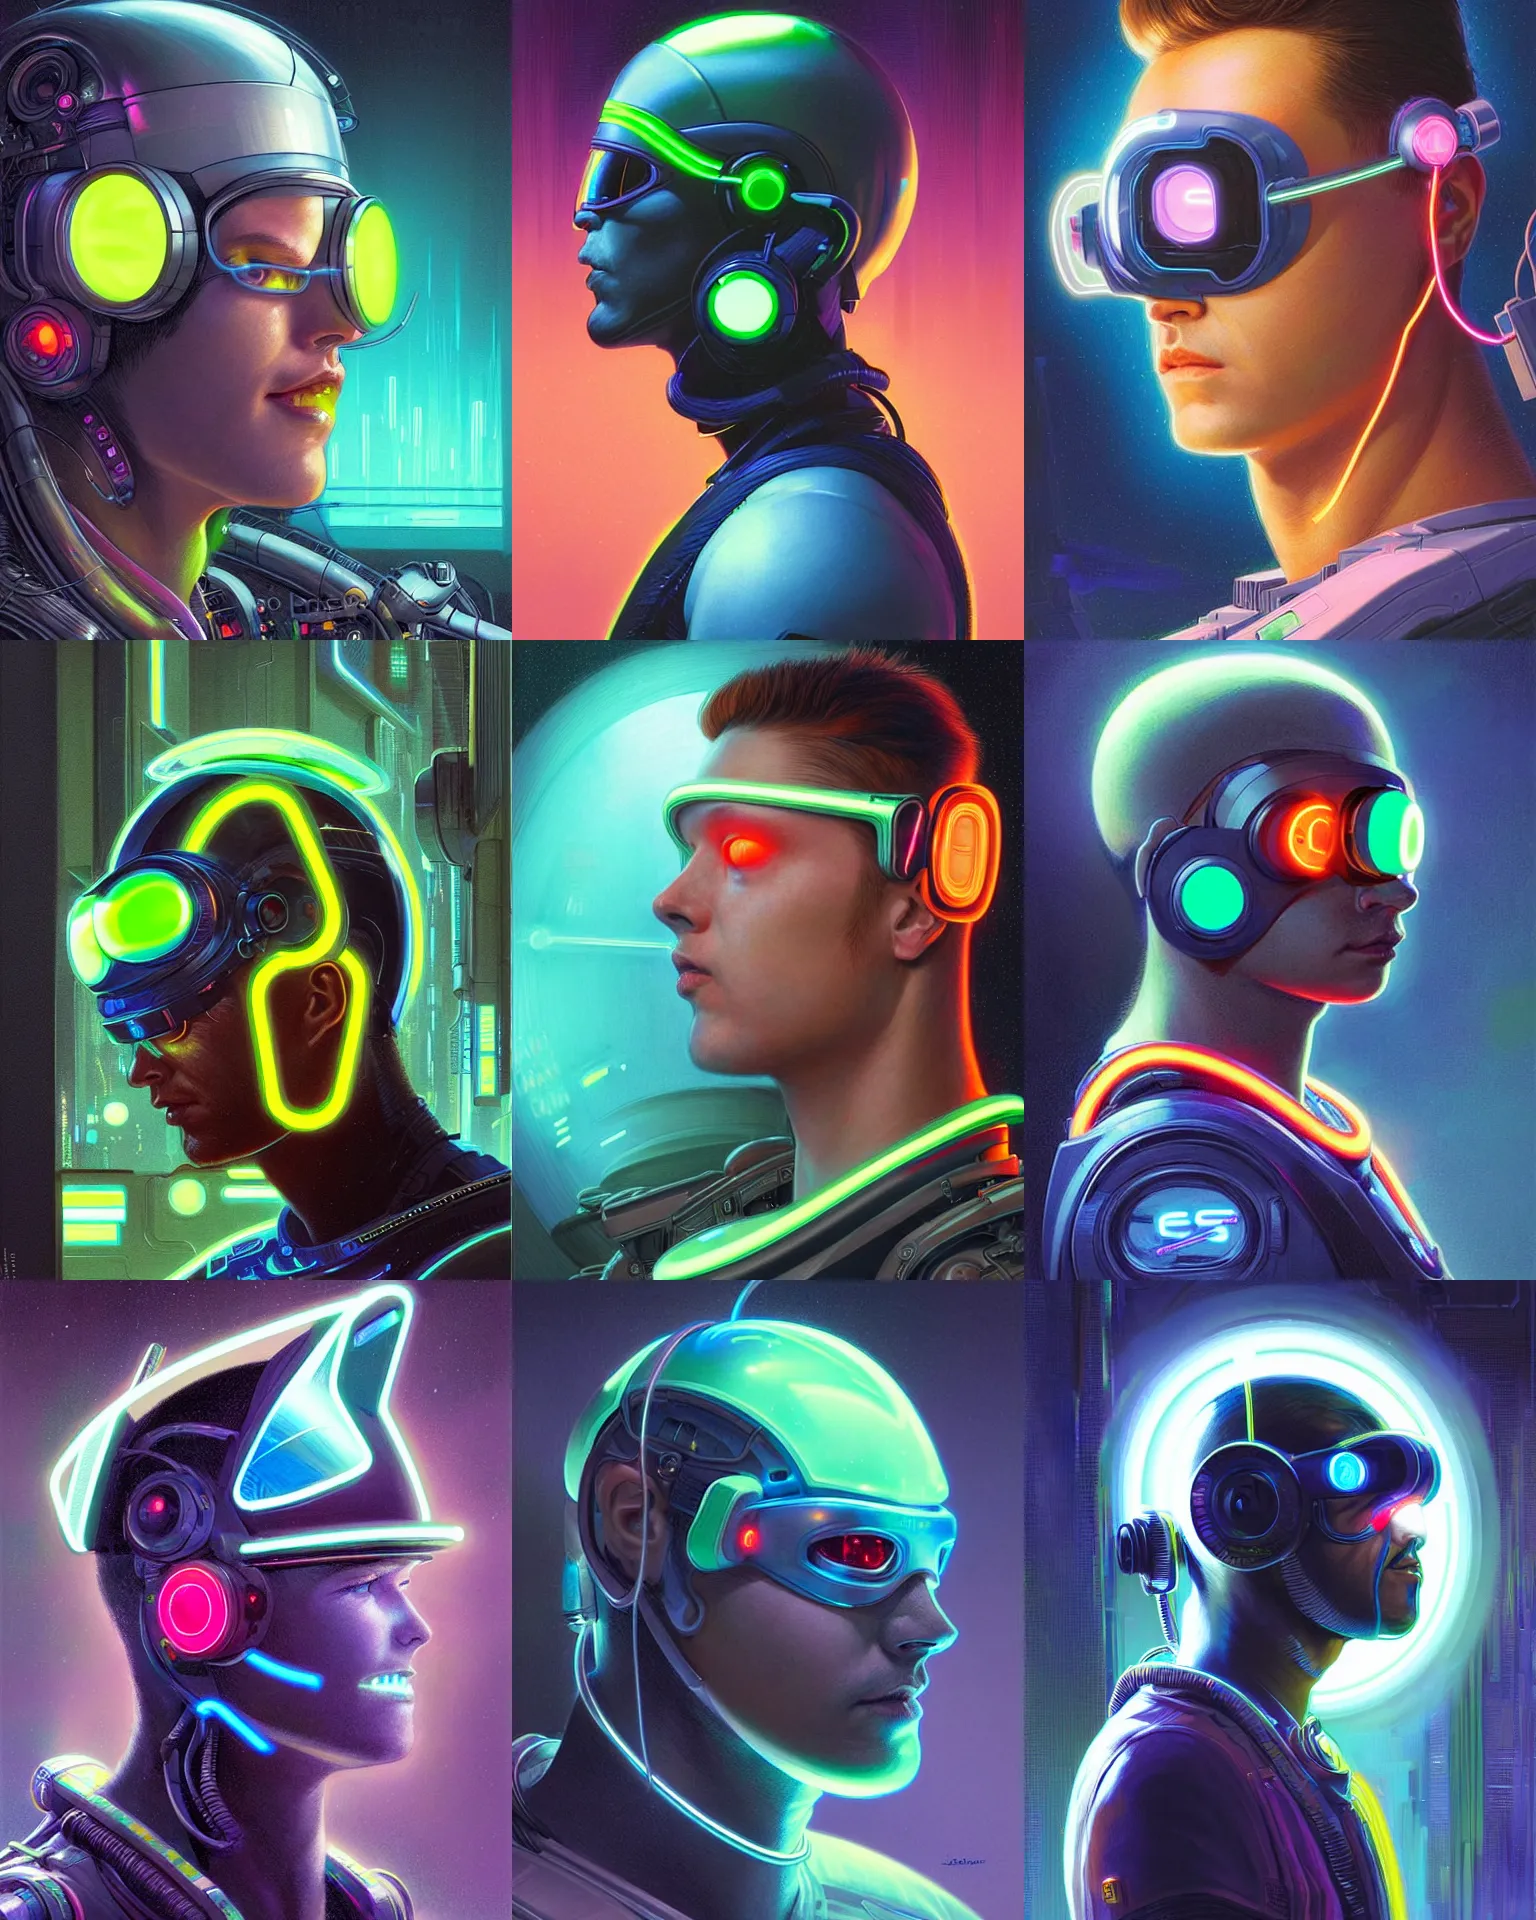 Prompt: sillouete side view future coder man, stylized cyclops display over eyes and sleek glowing headset, neon accents, holographic colors, desaturated headshot portrait digital painting by donato giancola, rossdraws, ivan bilibin, john berkey, astronaut cyberpunk electric lights profile